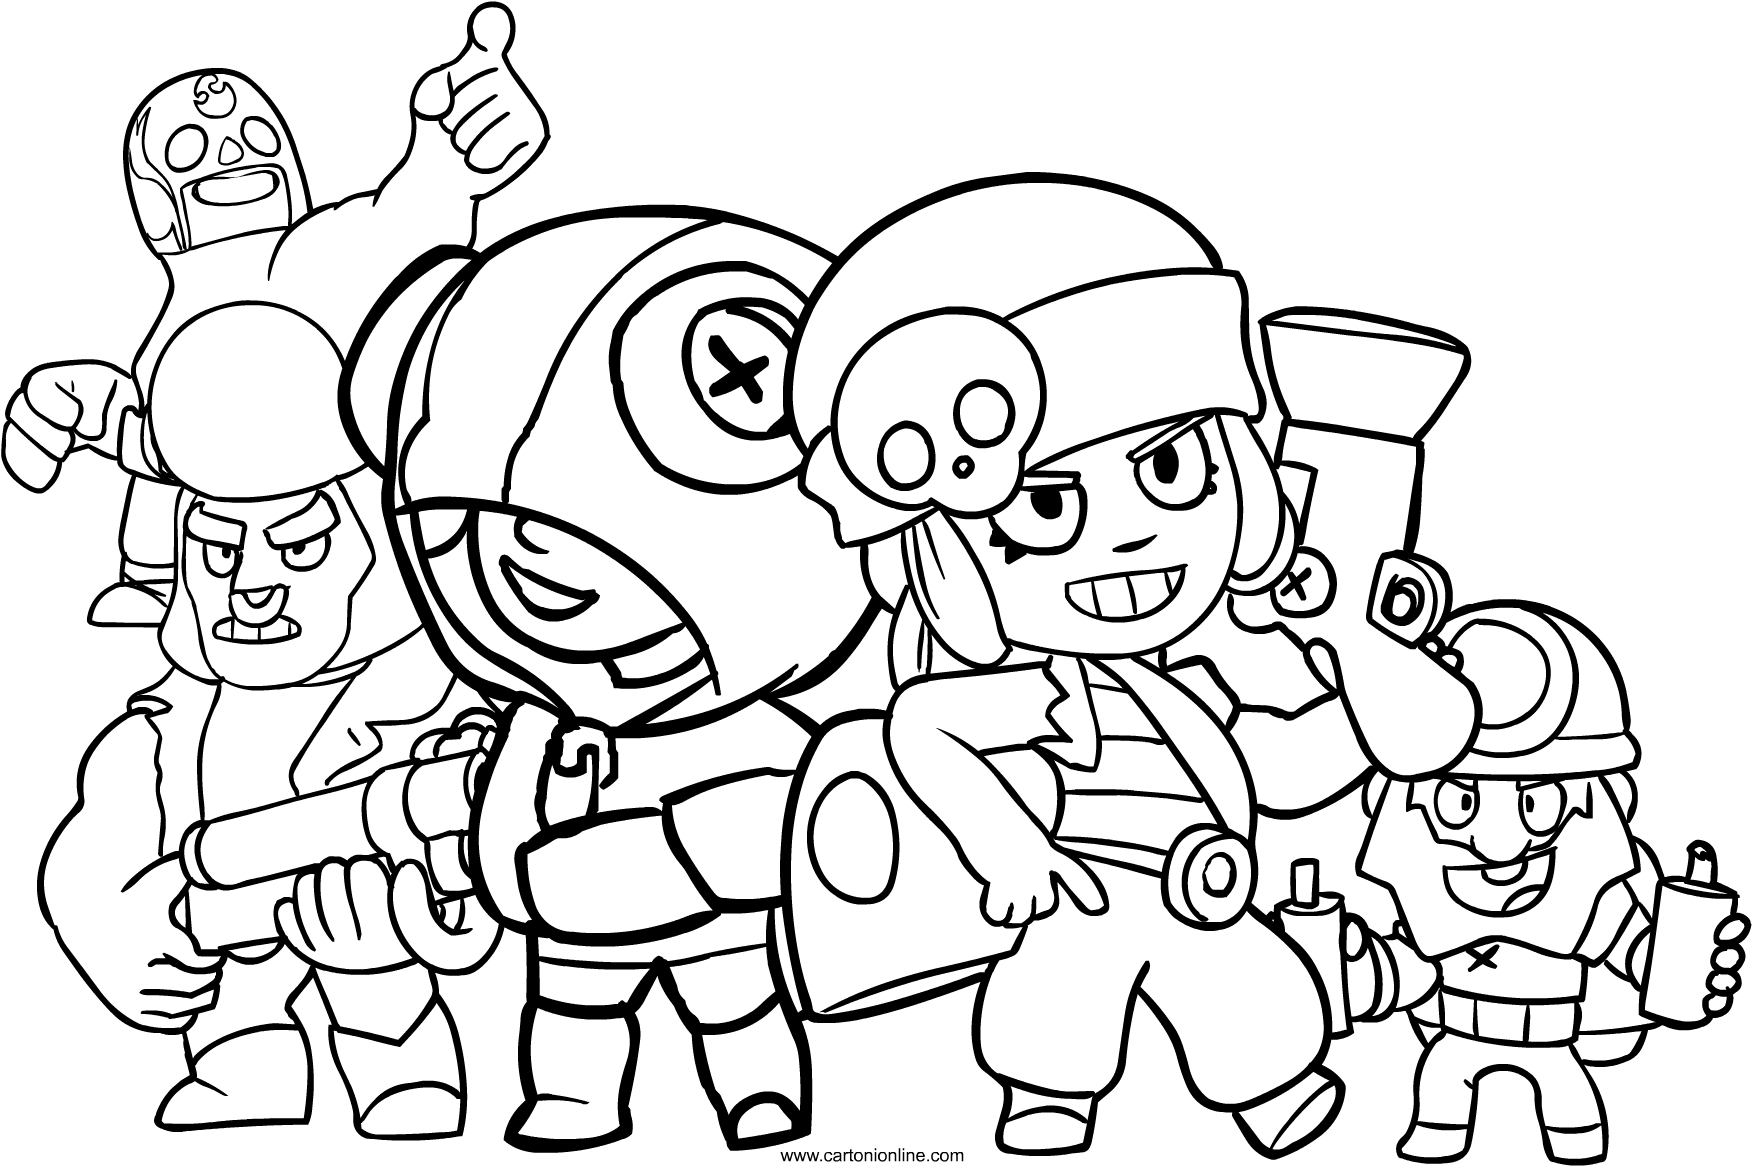 Brawl Stars Coloring Pages Coloring Home - coloriage brawl stars skipe